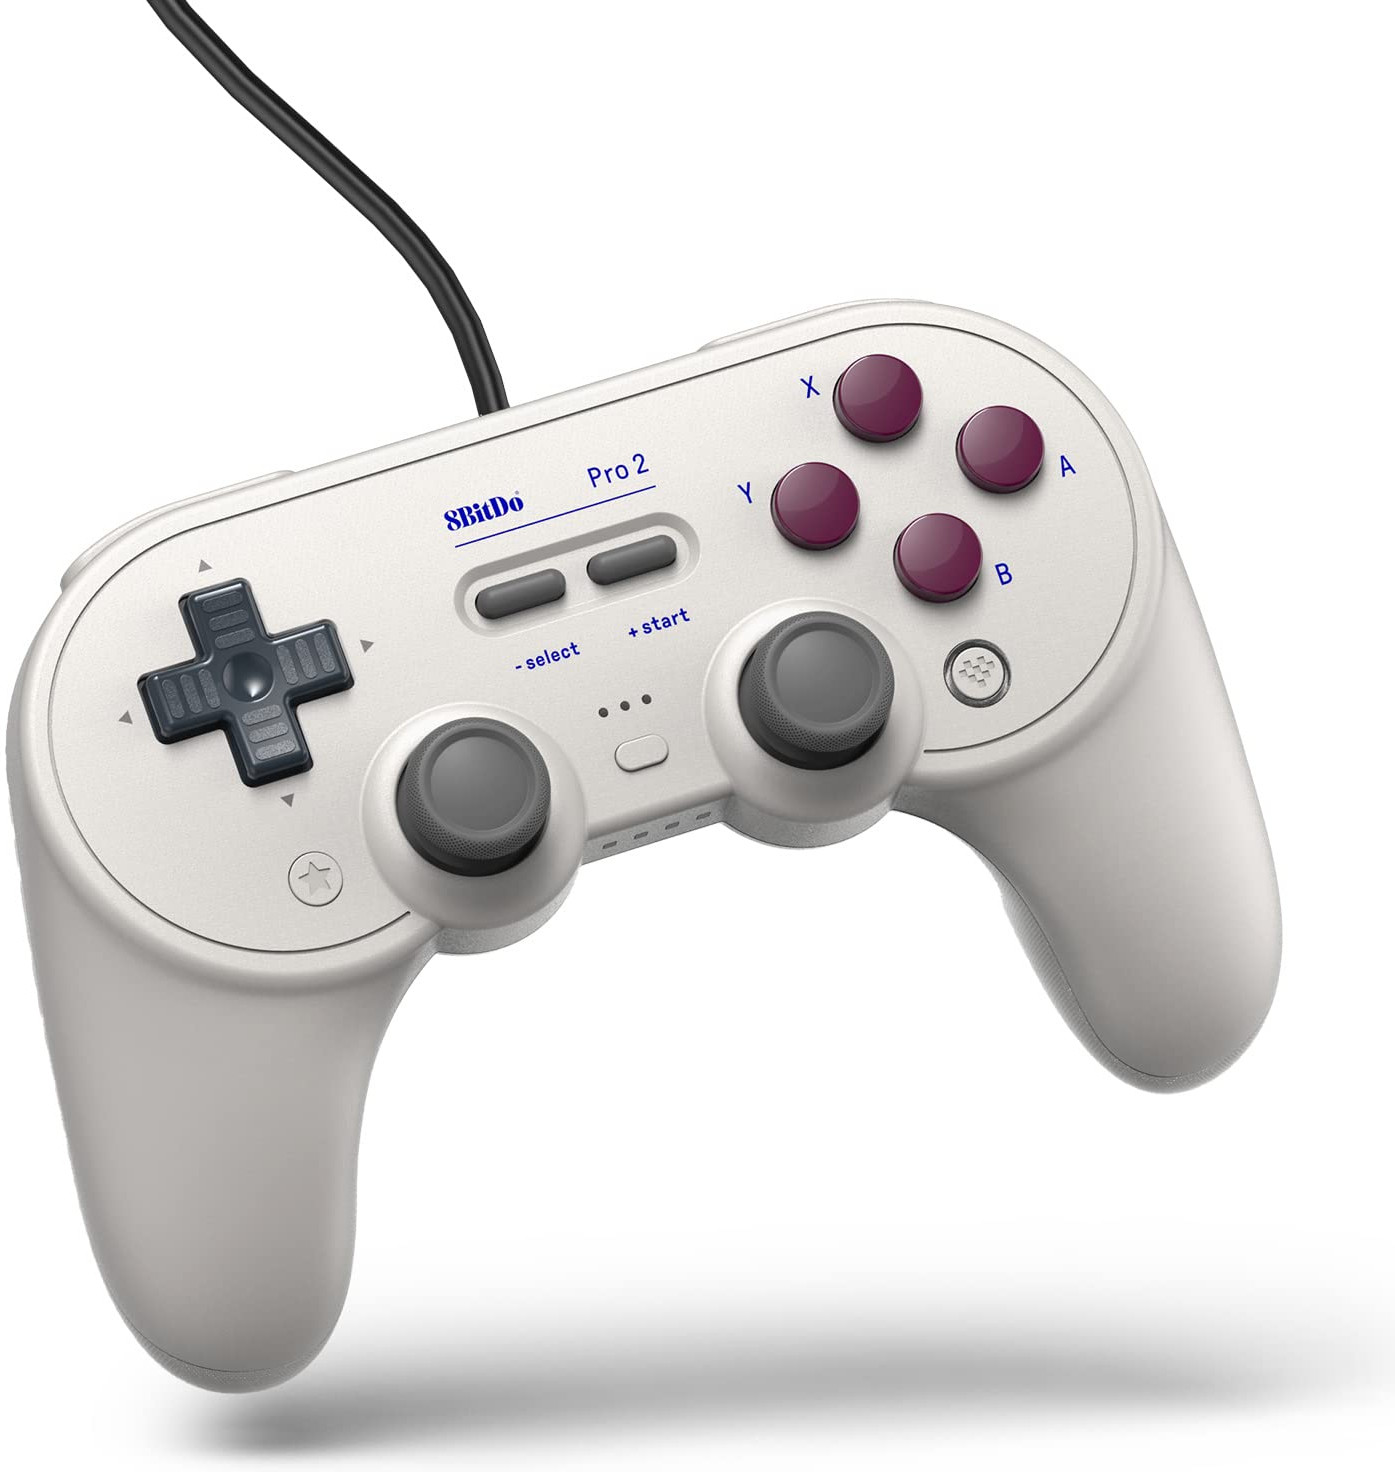 Pro 2 Wired Gamepad (G Classic Edition)